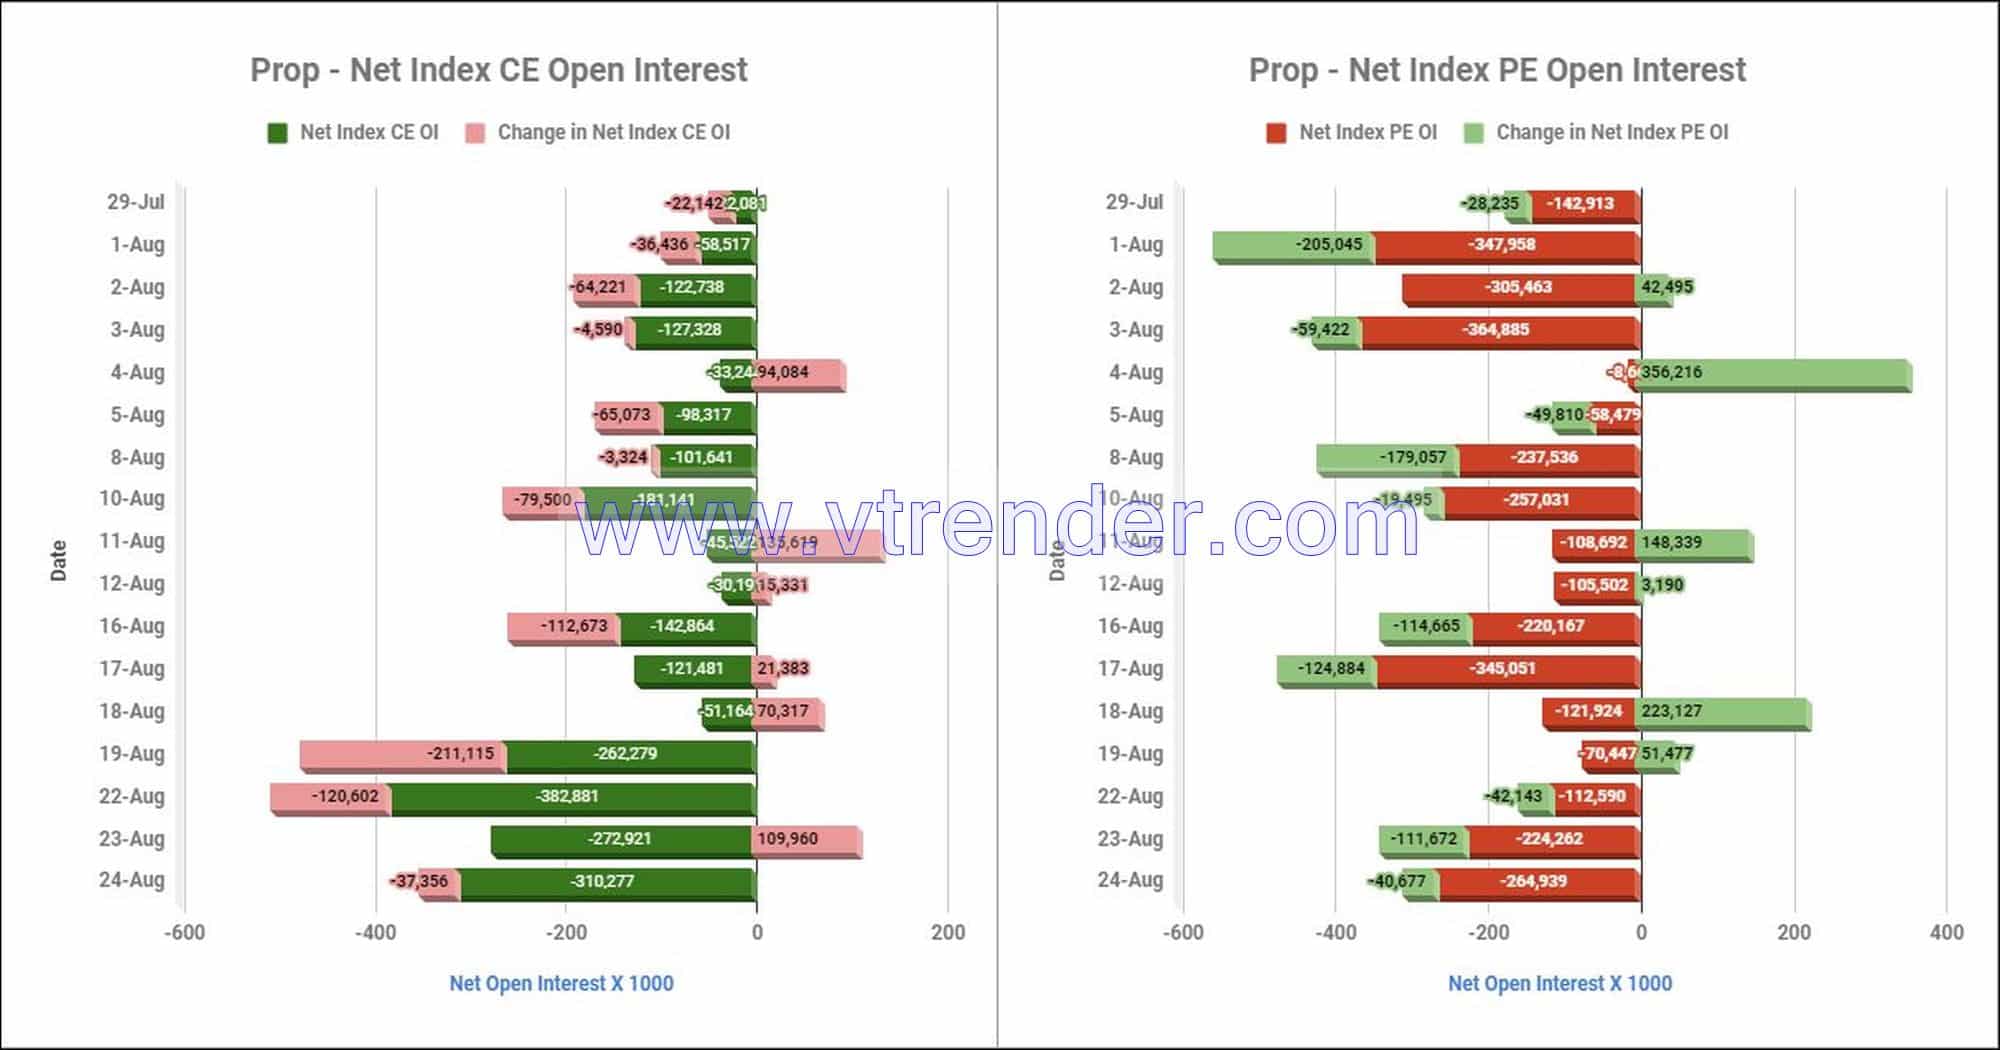 Proinop24Aug Participantwise Net Open Interest And Net Equity Investments – 24Th Aug 2022 Client, Equity, Fii, Index Futures, Index Options, Open Interest, Prop